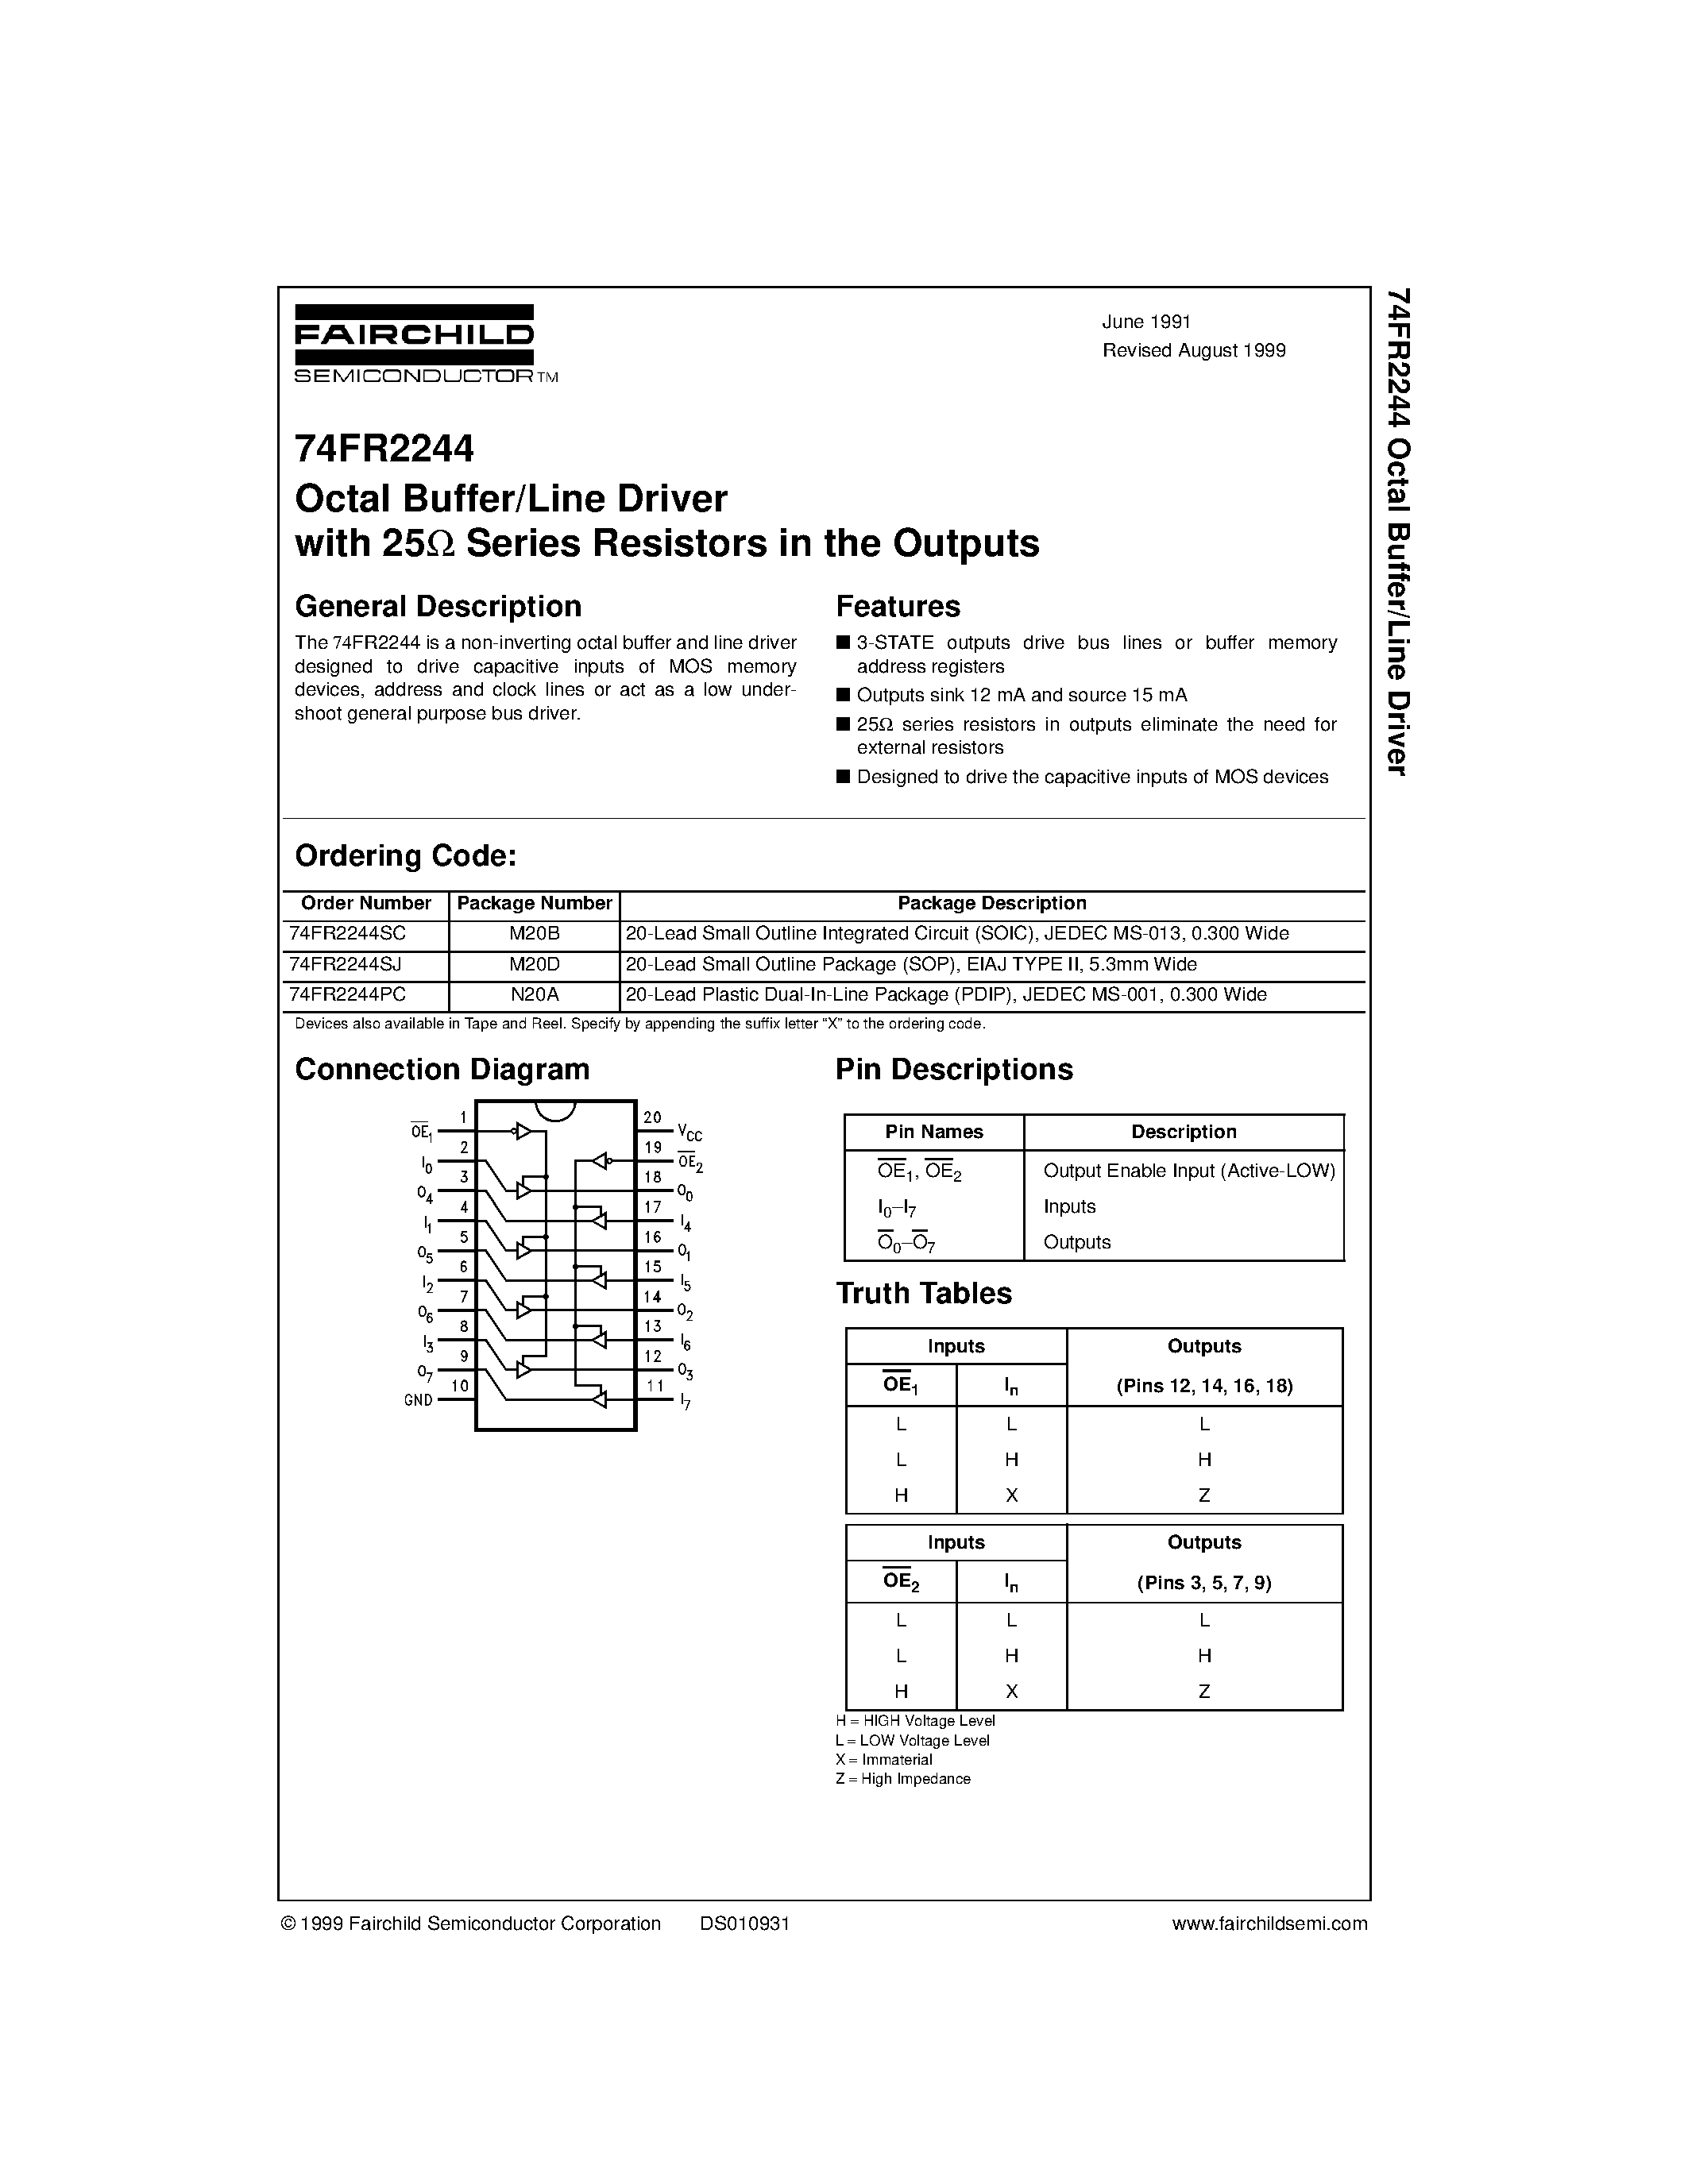 Datasheet 74FR2244SC - Octal Buffer/Line Driver with 25 Series Resistors in the Outputs page 1